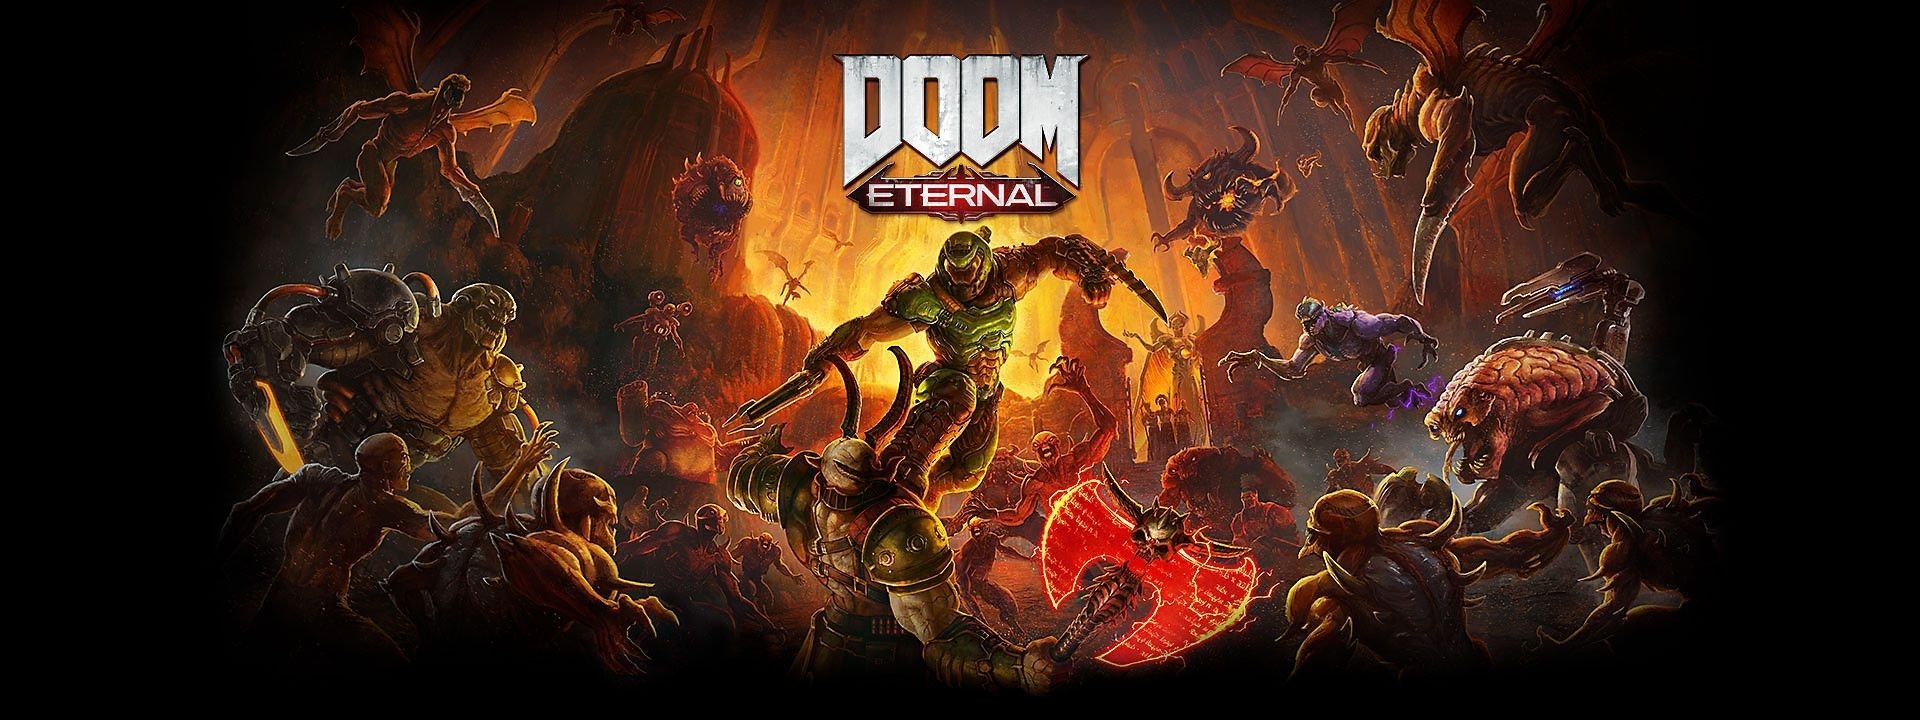 DOOM ETERNAL RELEASES SUCCESSFULLY WITH VIRTUOS ART